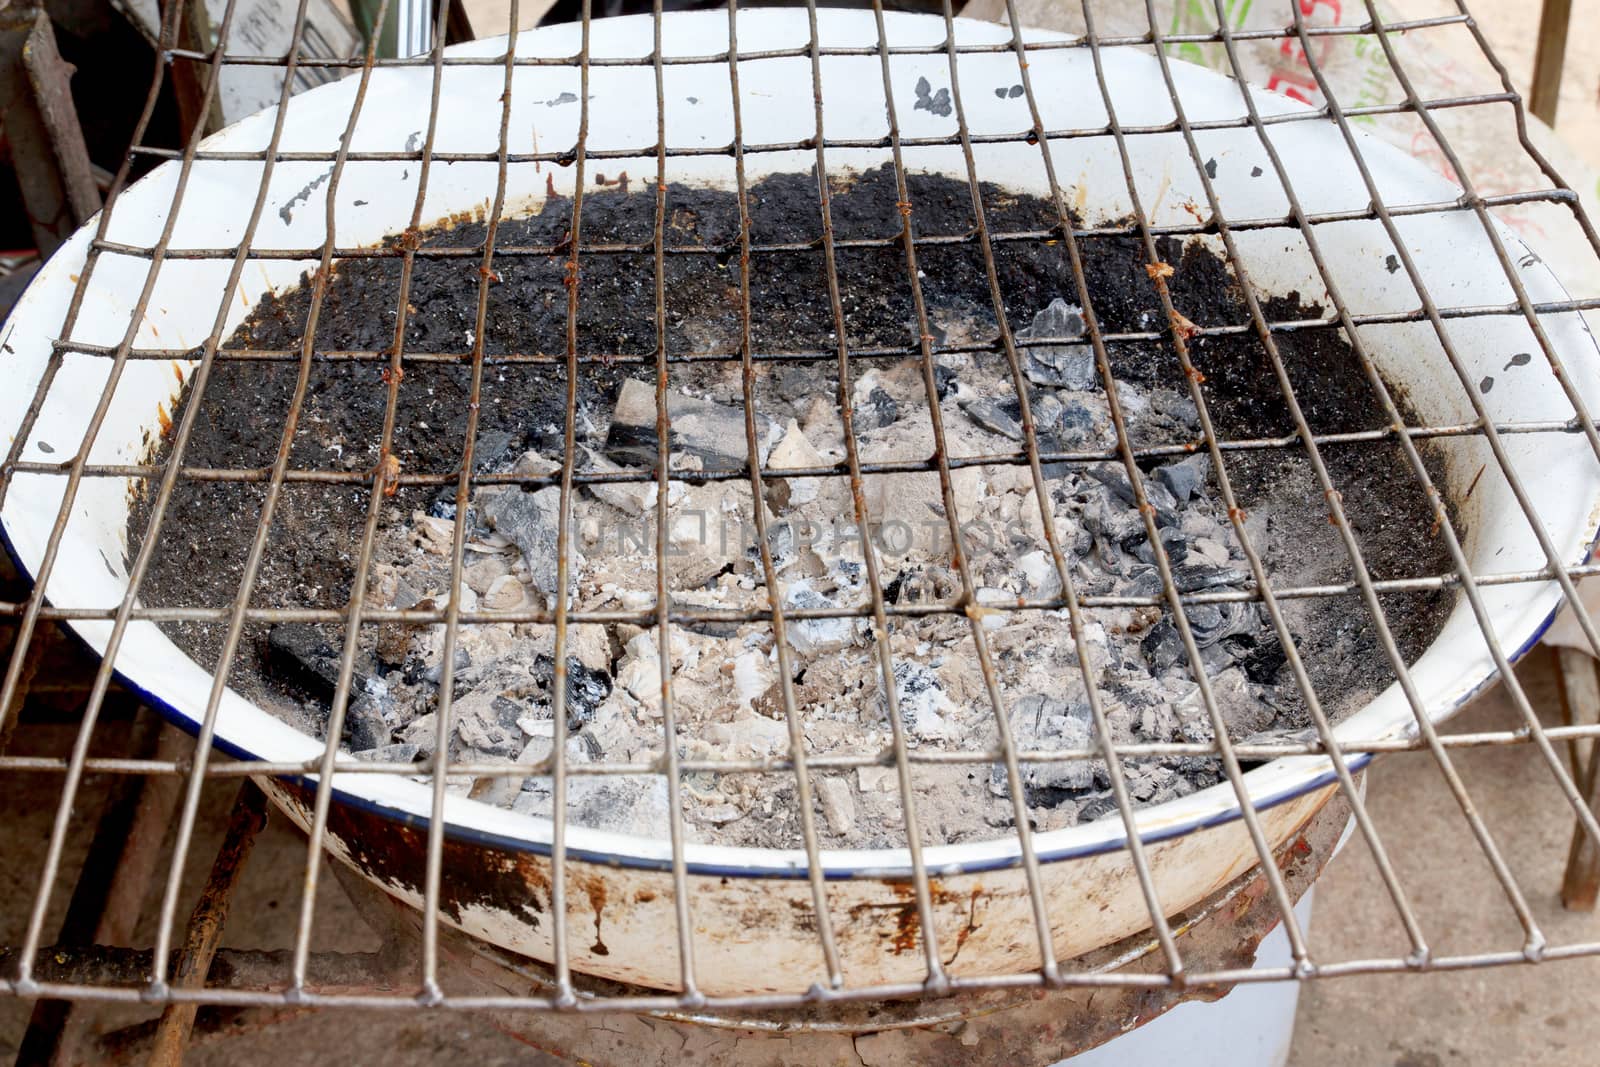 Charcoal stove is not fires with grill.